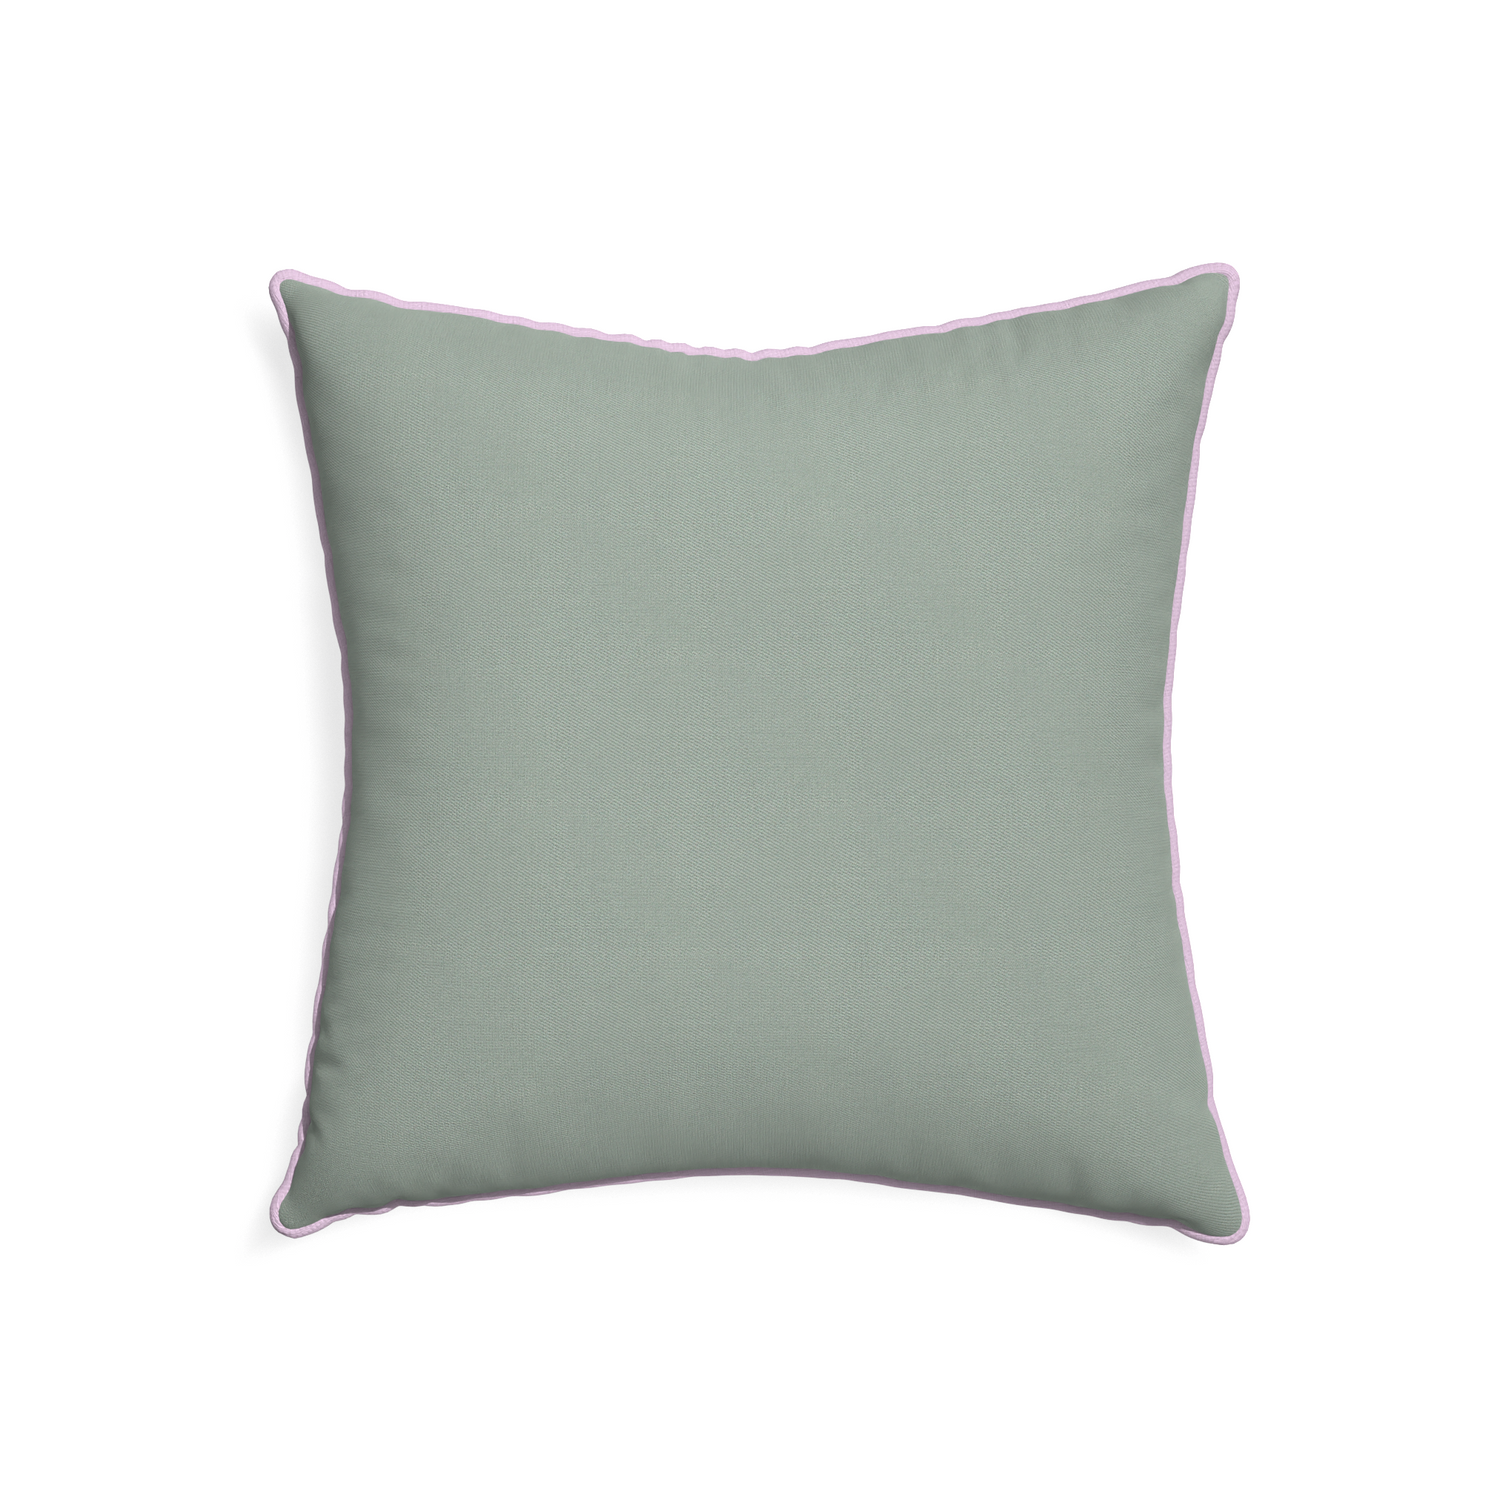 22-square sage custom sage green cottonpillow with l piping on white background